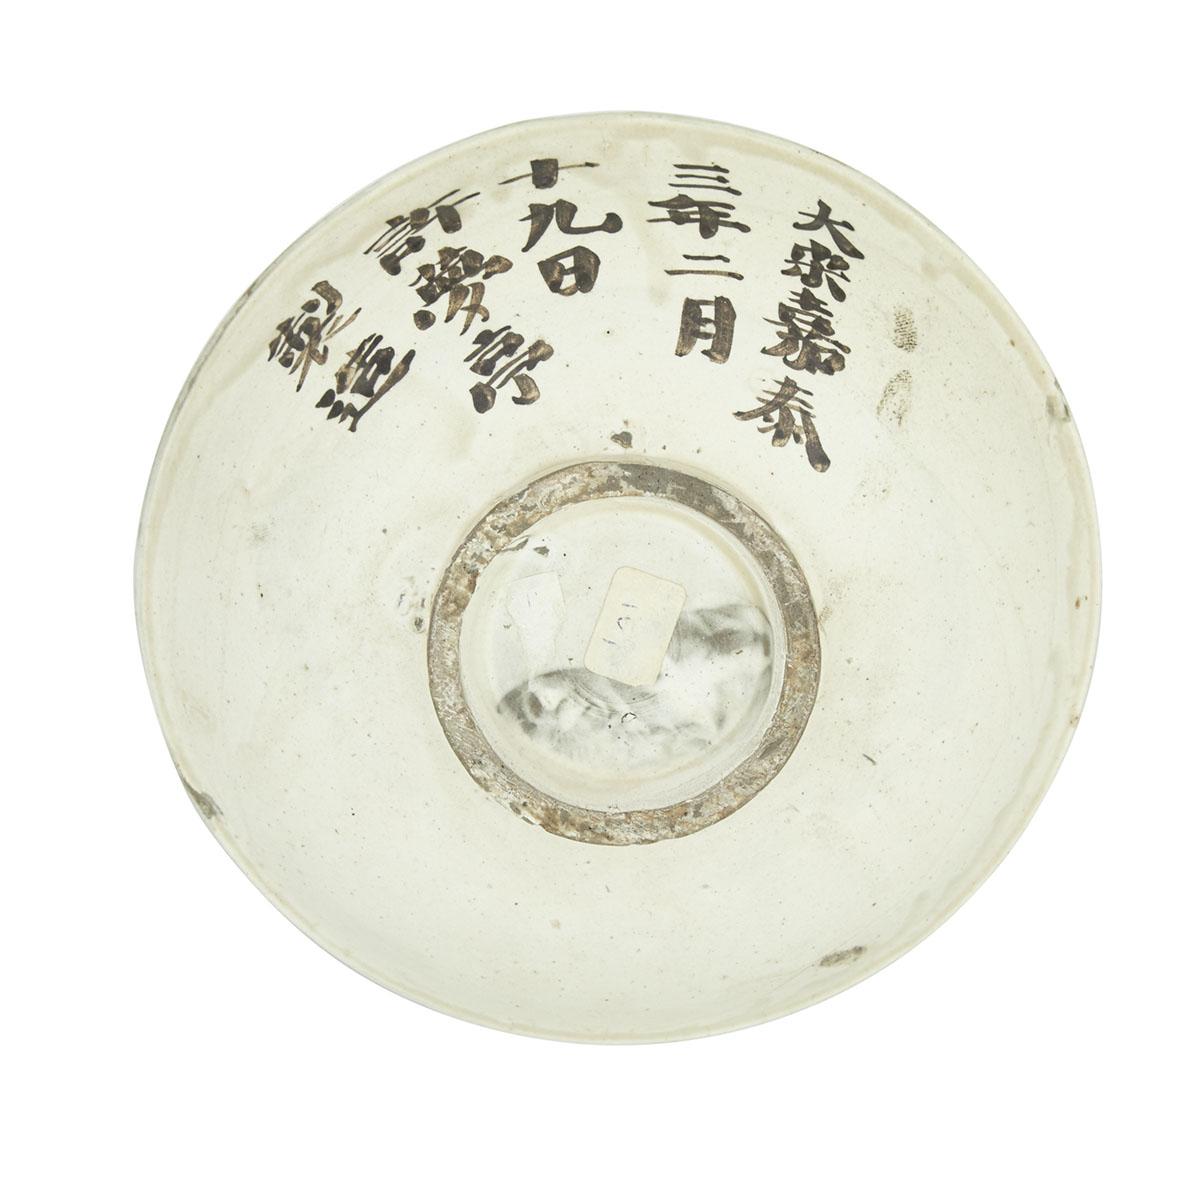 CIZHOU WARE DISH, SONG DYNASTY OR LATER 宋或更晚 磁州窯碗 Painted over the interior with a lush bamboo - Image 2 of 2